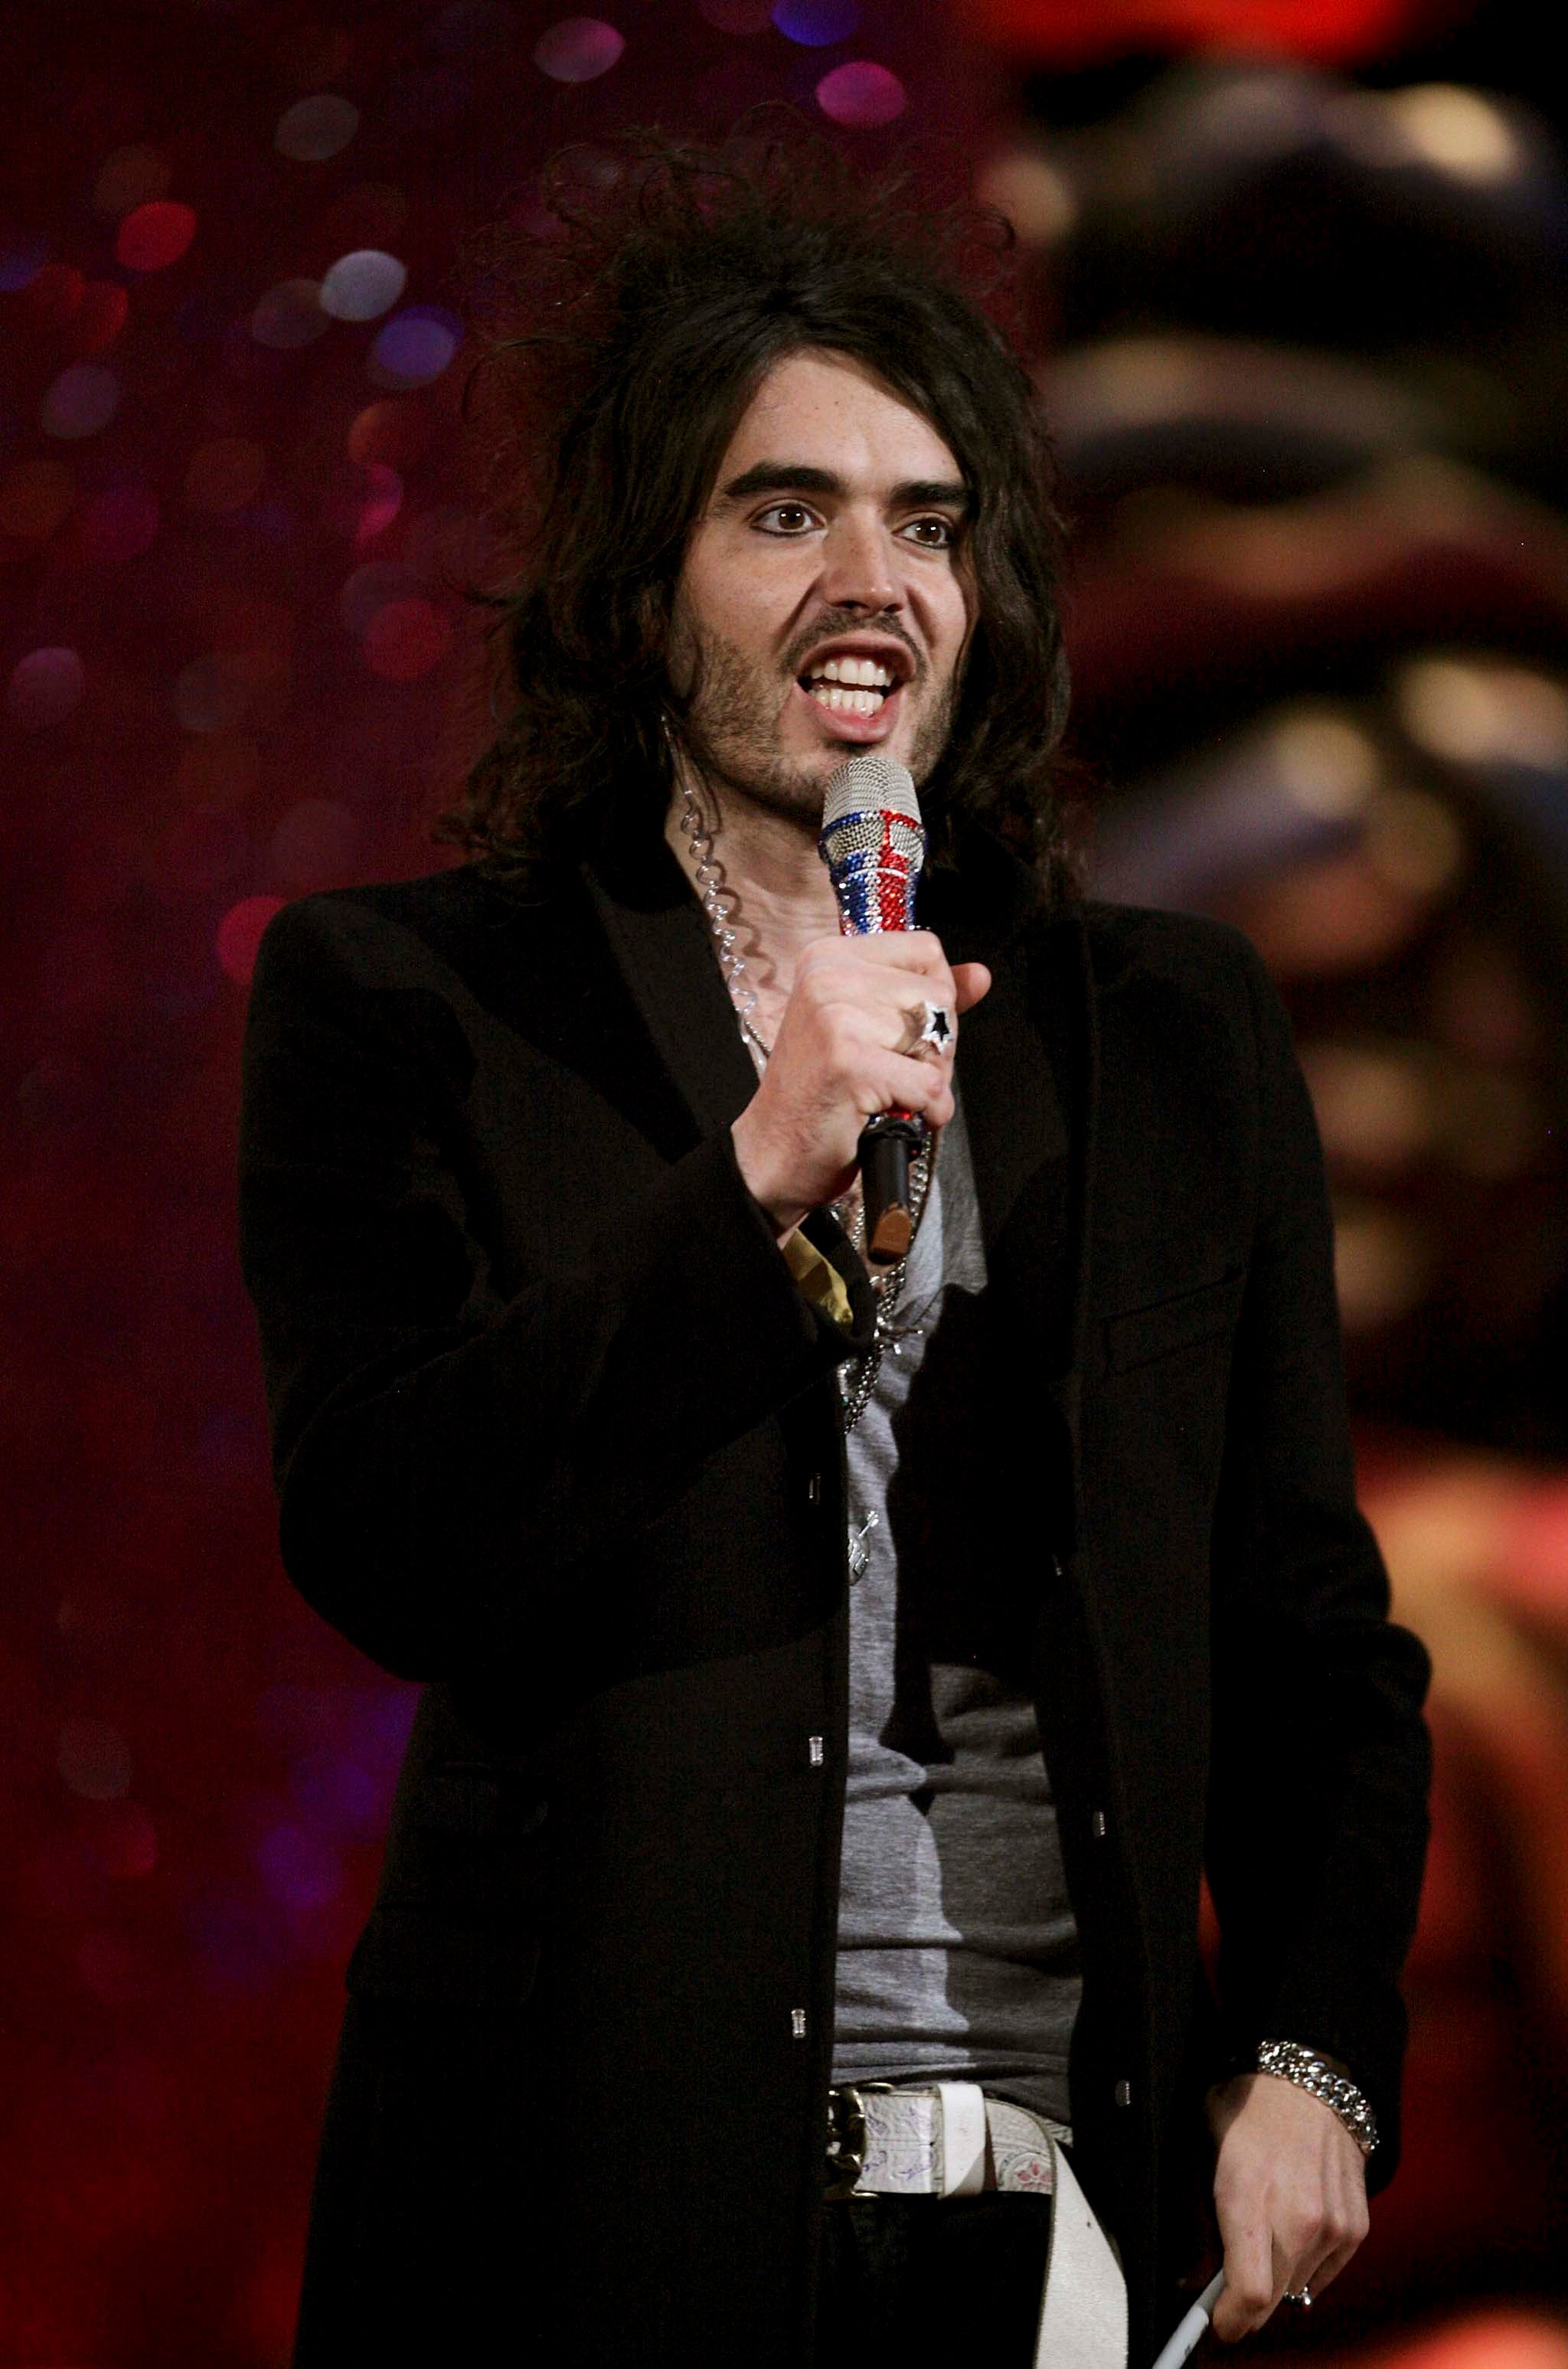 Russell Brand, 2007 Never one to shy away from offending, Russell raised a few eyebrows with quips about Robbie Williams&#x2019; spell in rehab, the Queen&#x2019;s &#x201c;naughty bits&#x201d; and a British soldier killed in Iraq. ITV received o